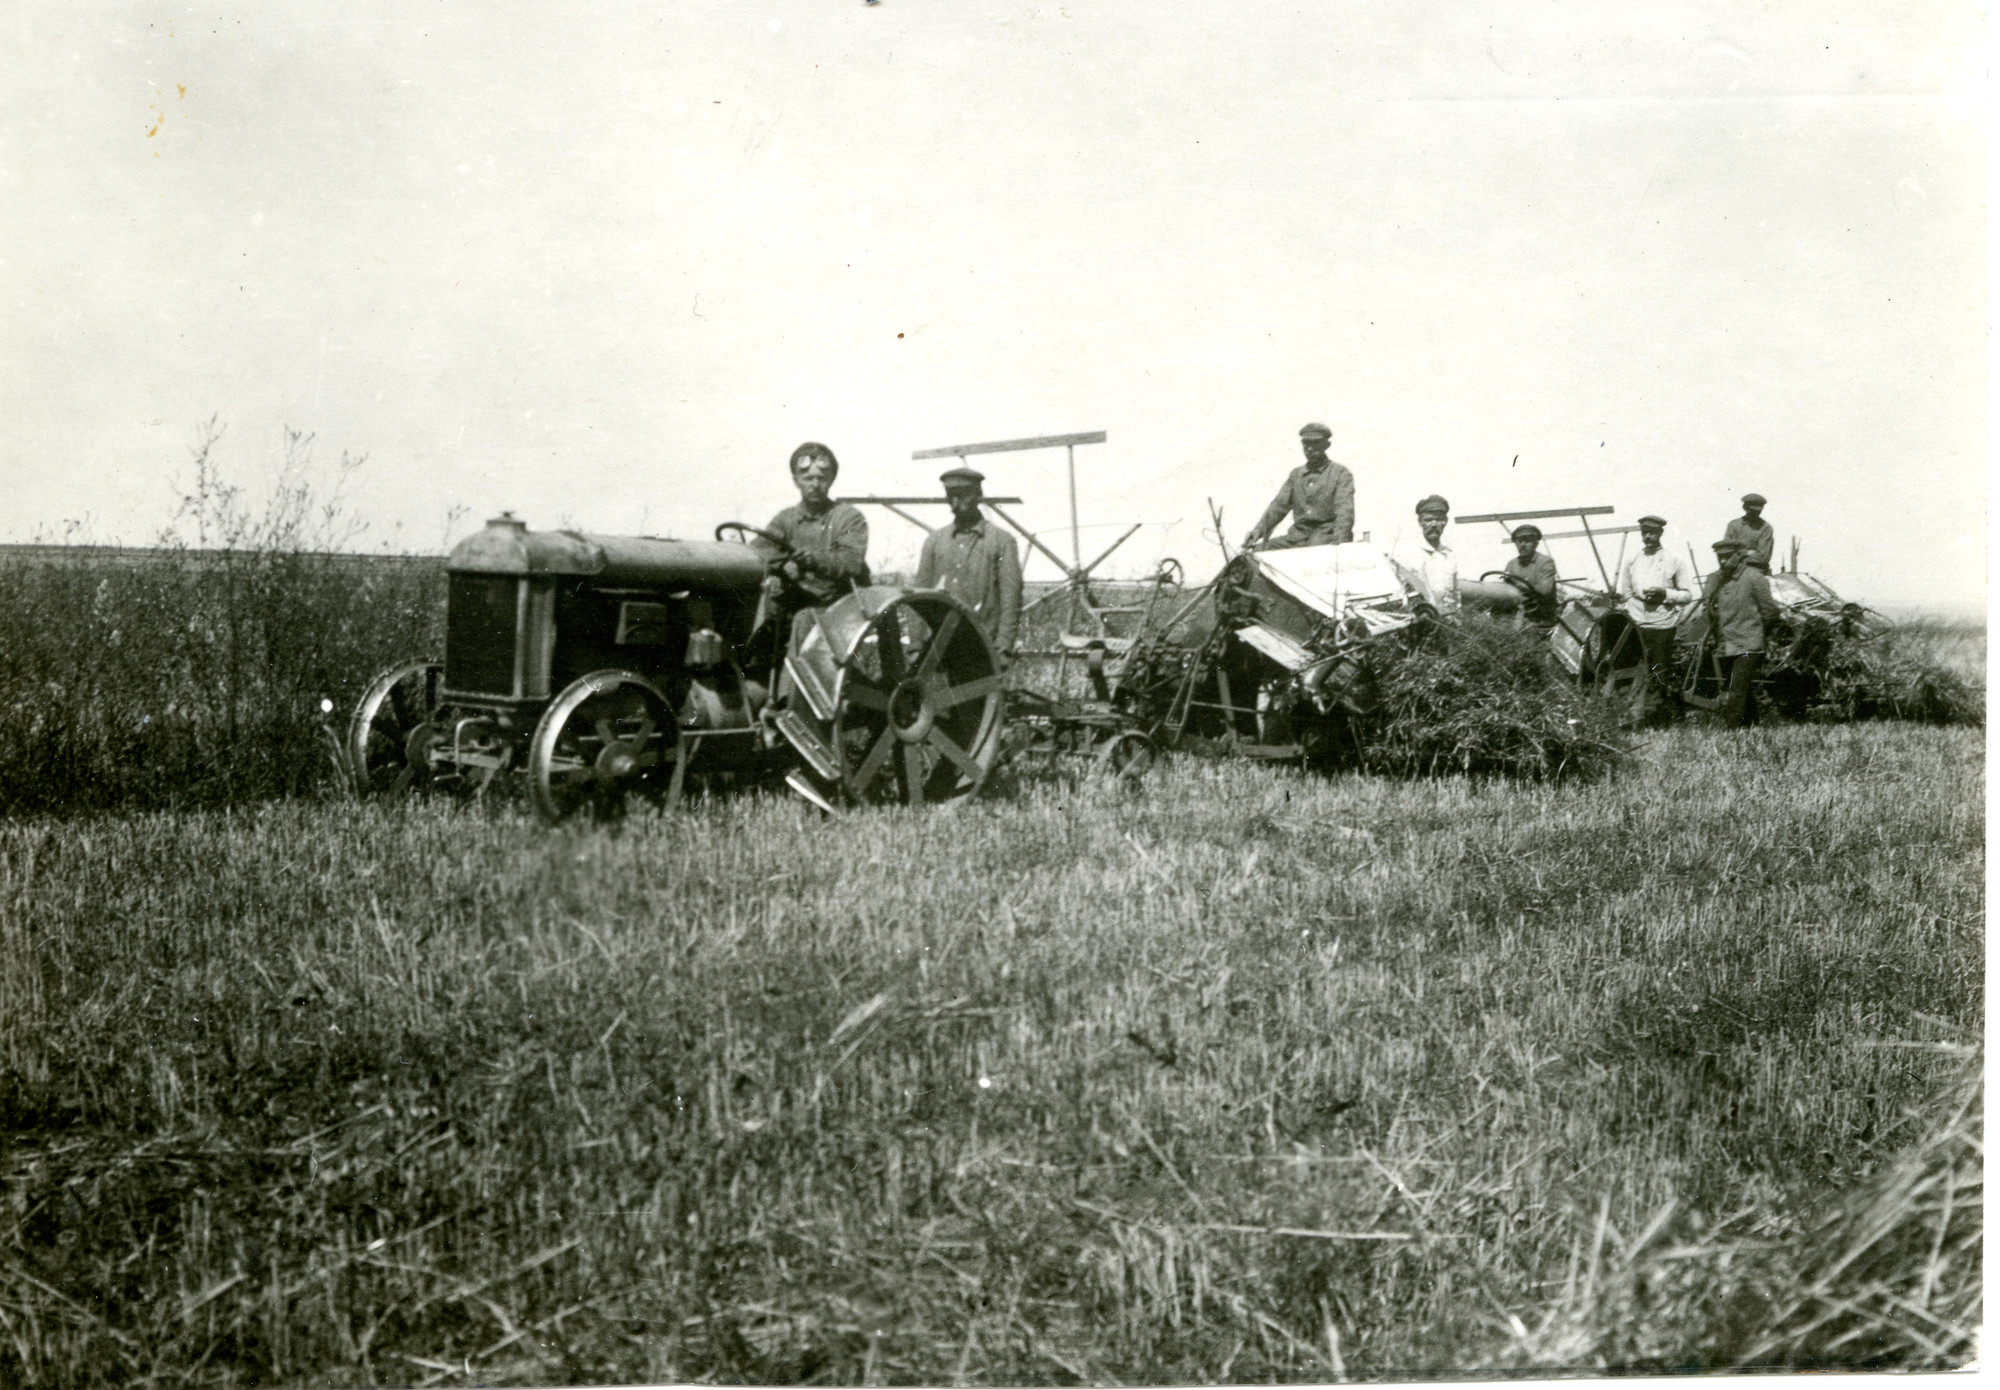 A black and white photo from the 1920s of farmers in a field with tractors